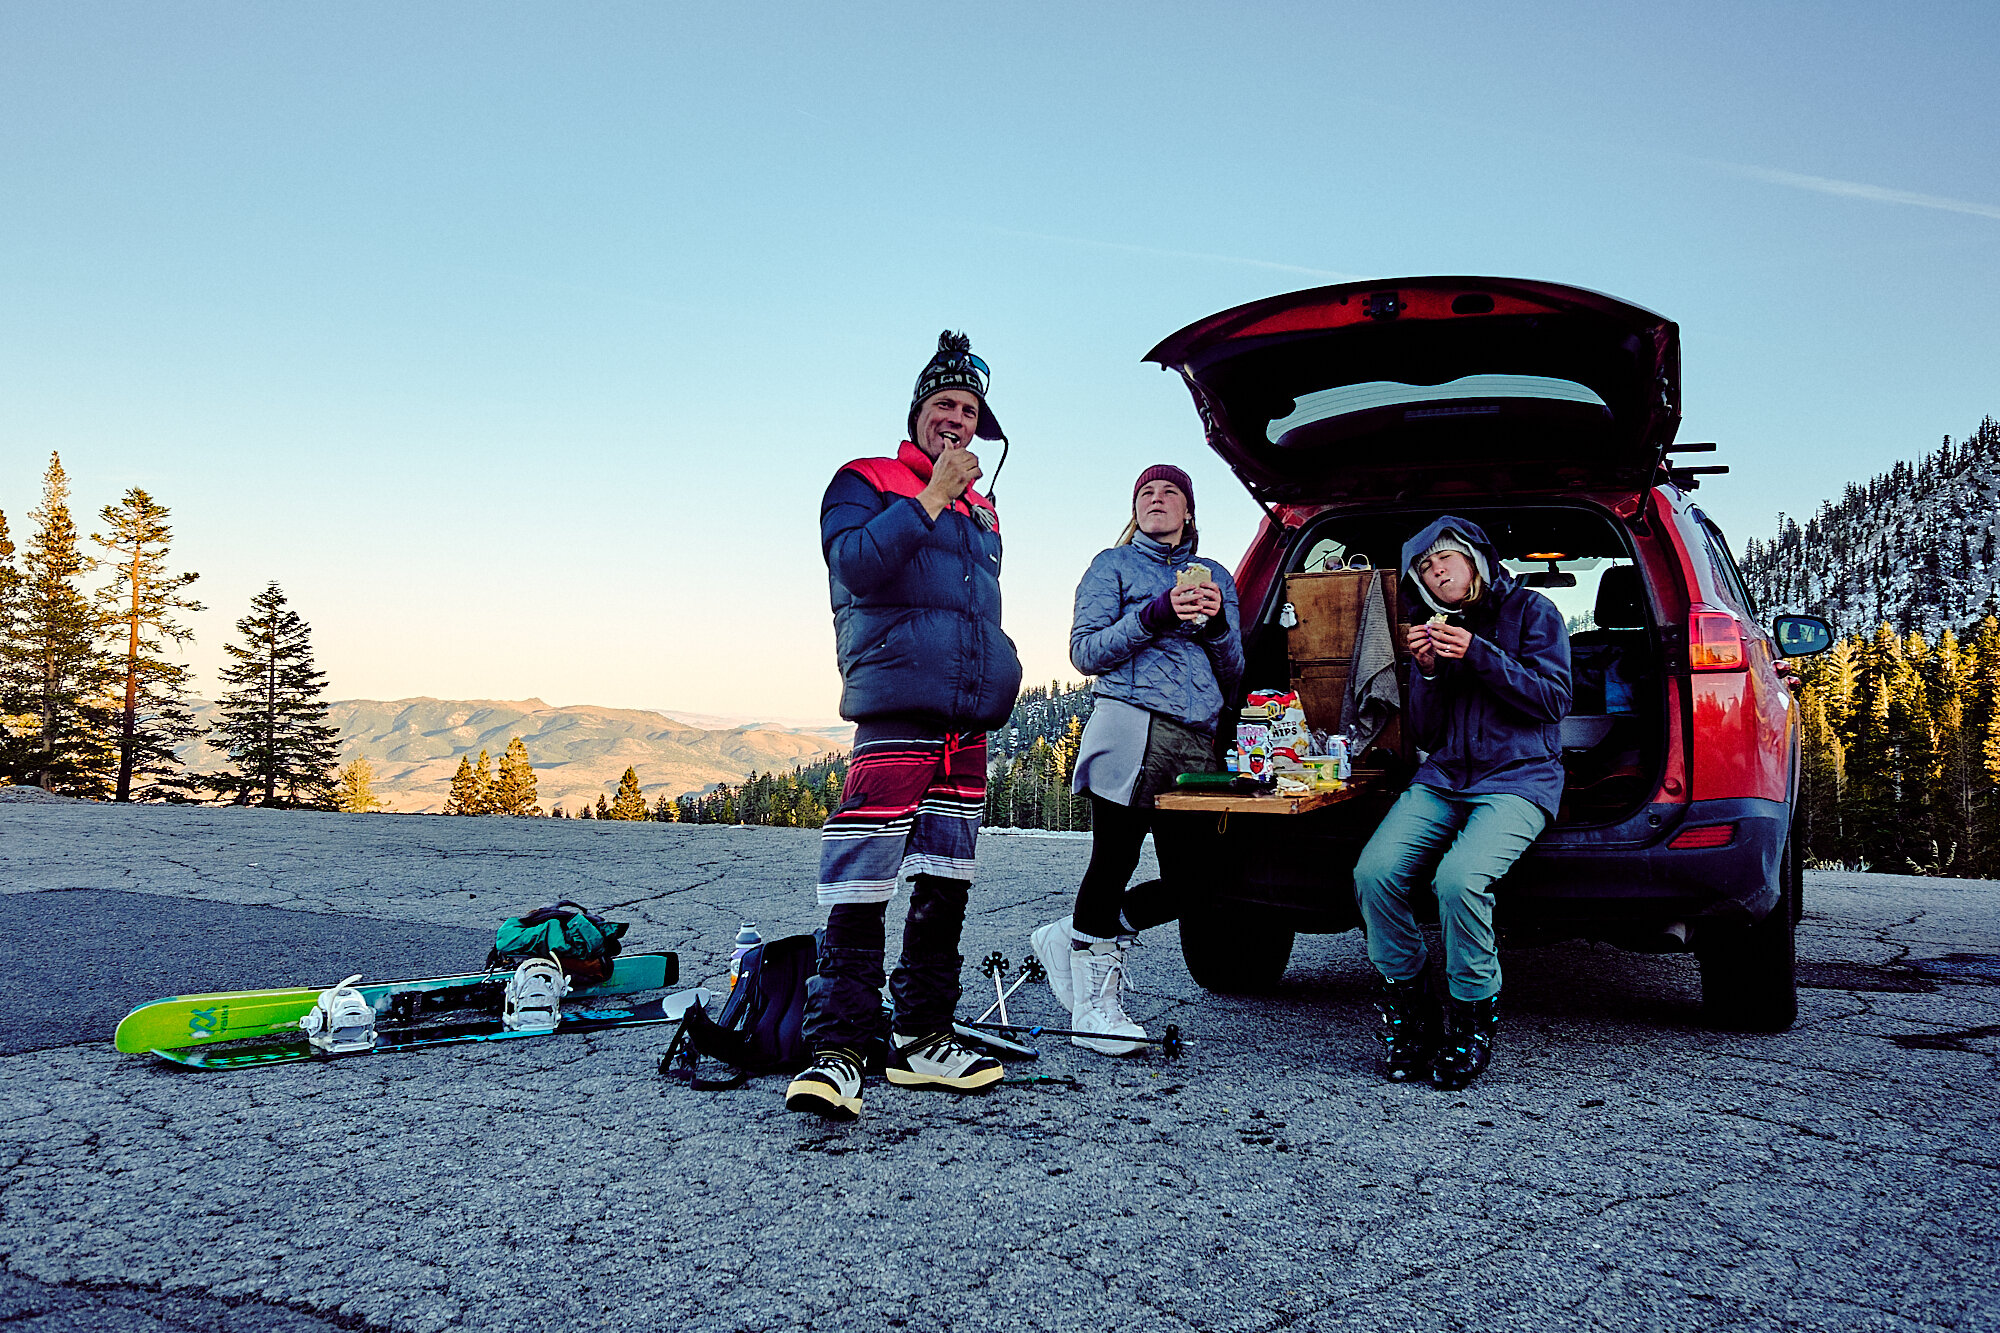  Post-ski hors d'oeuvres out of the back of my car. Shortly after, snack time came to an abrupt halt as the sun set and it got brutally cold. | 11/15/20 Mt. Rose, NV 